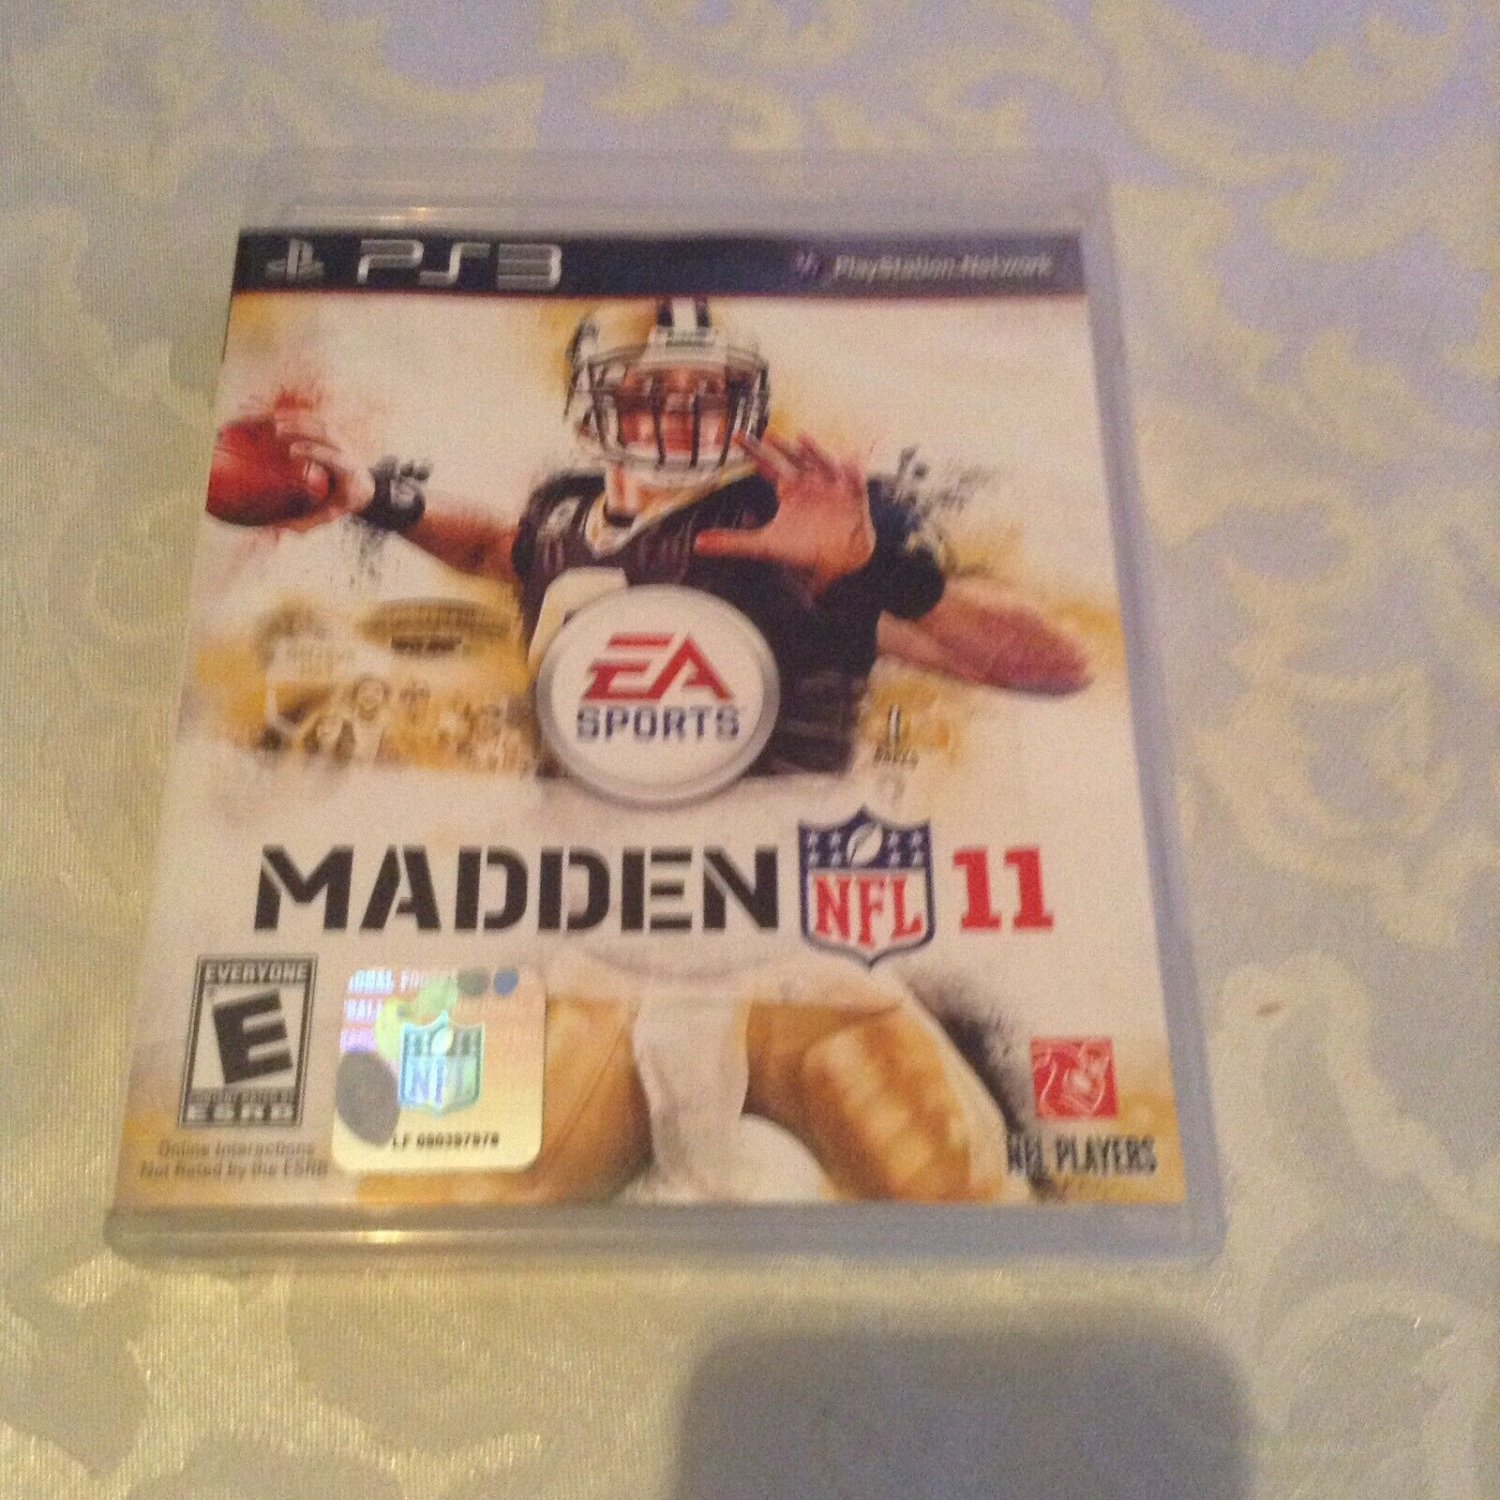 Madden NFL 11   Sony Playstation 3   Includes game manual and case